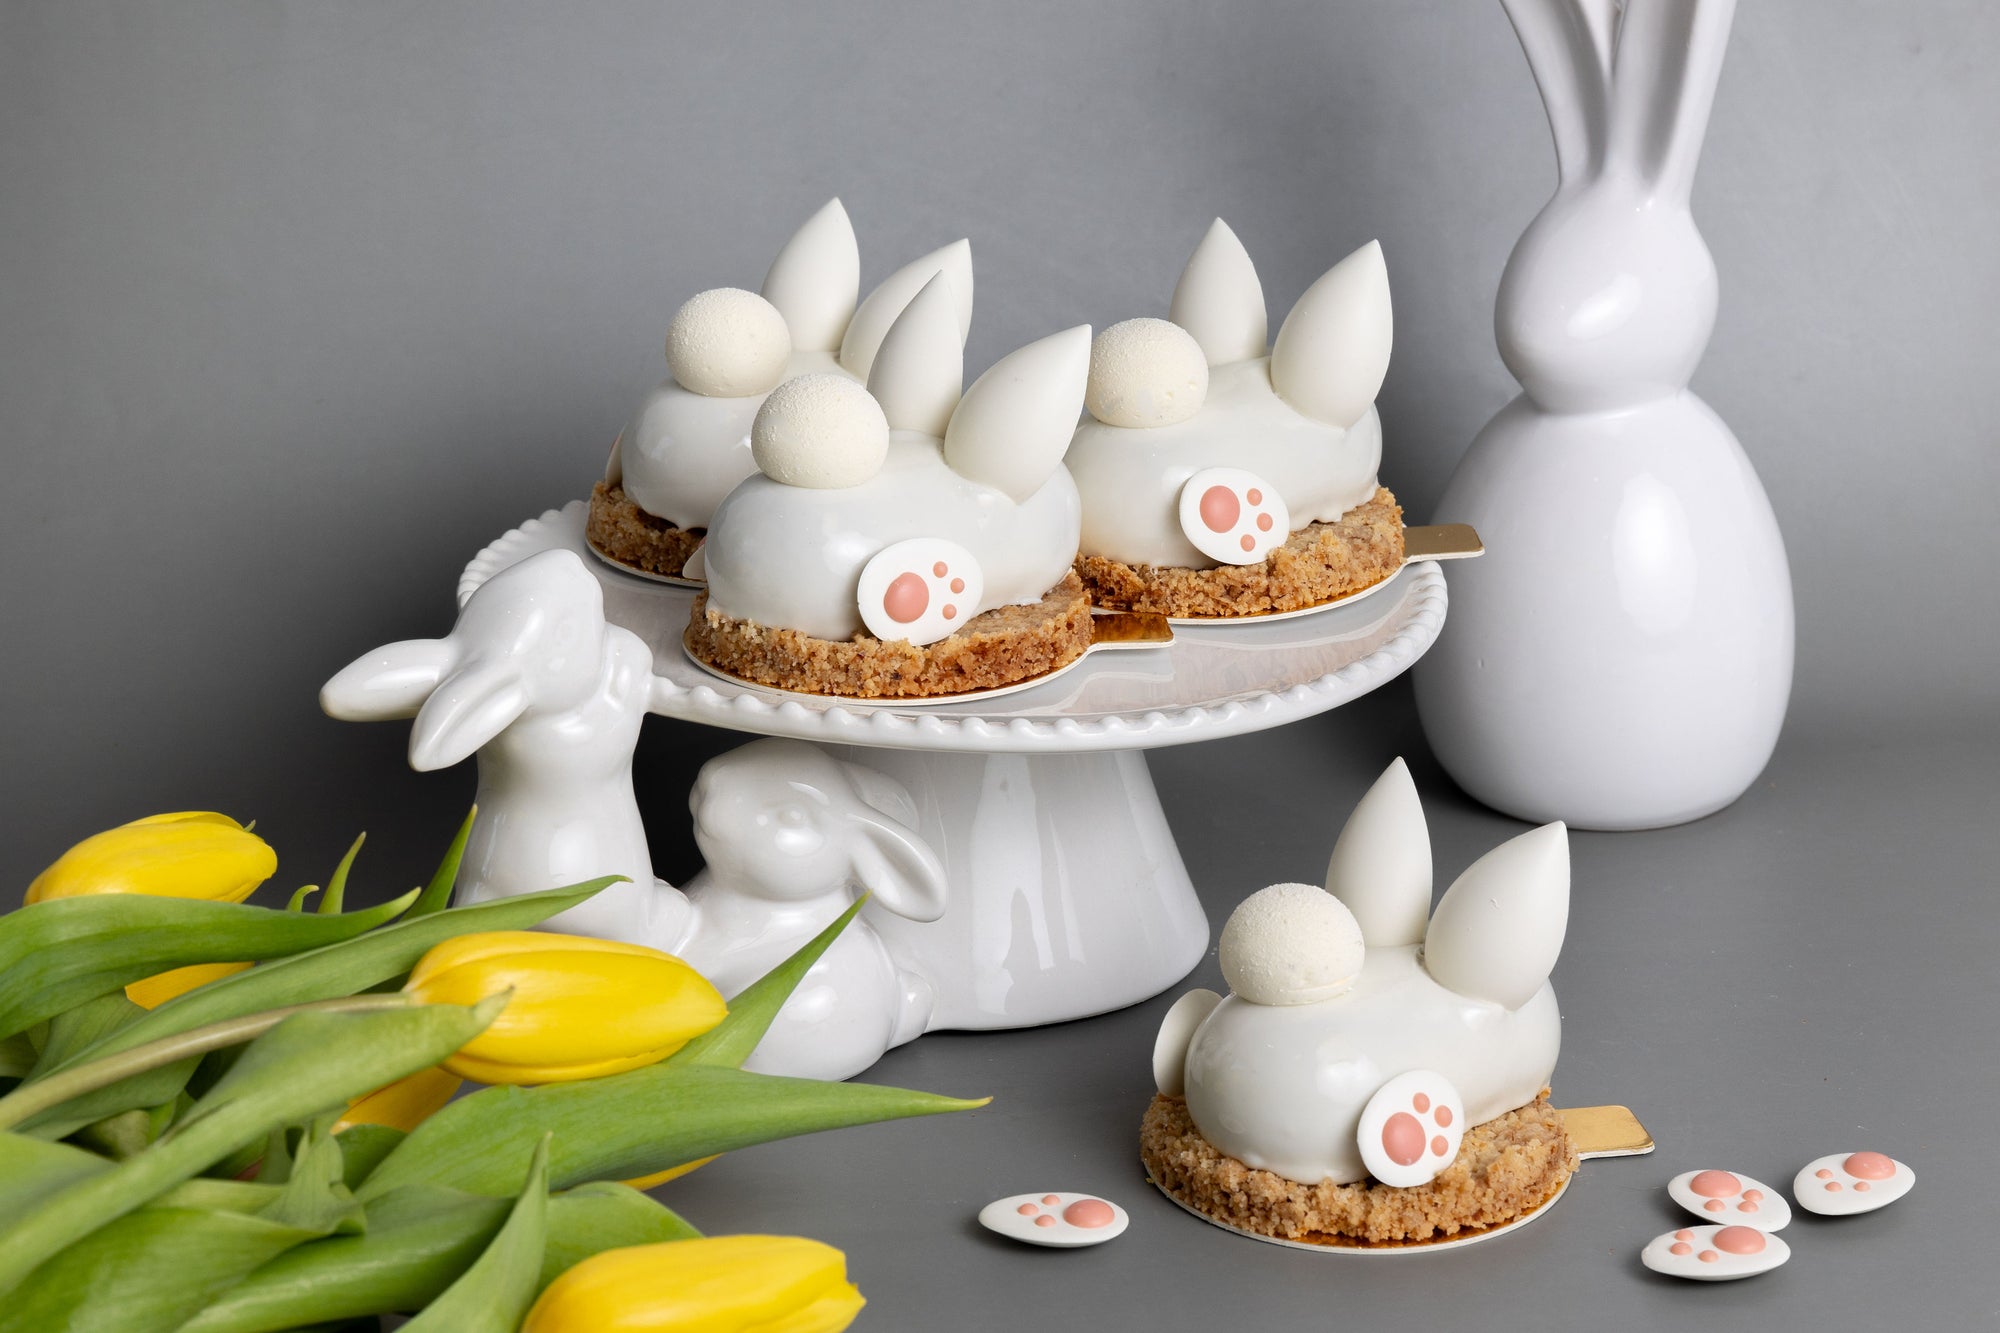 The best Easter desserts Vancouver, Burnaby, White Rock, BC by Chez Christophe gourmet Chocolate and Cake Shop